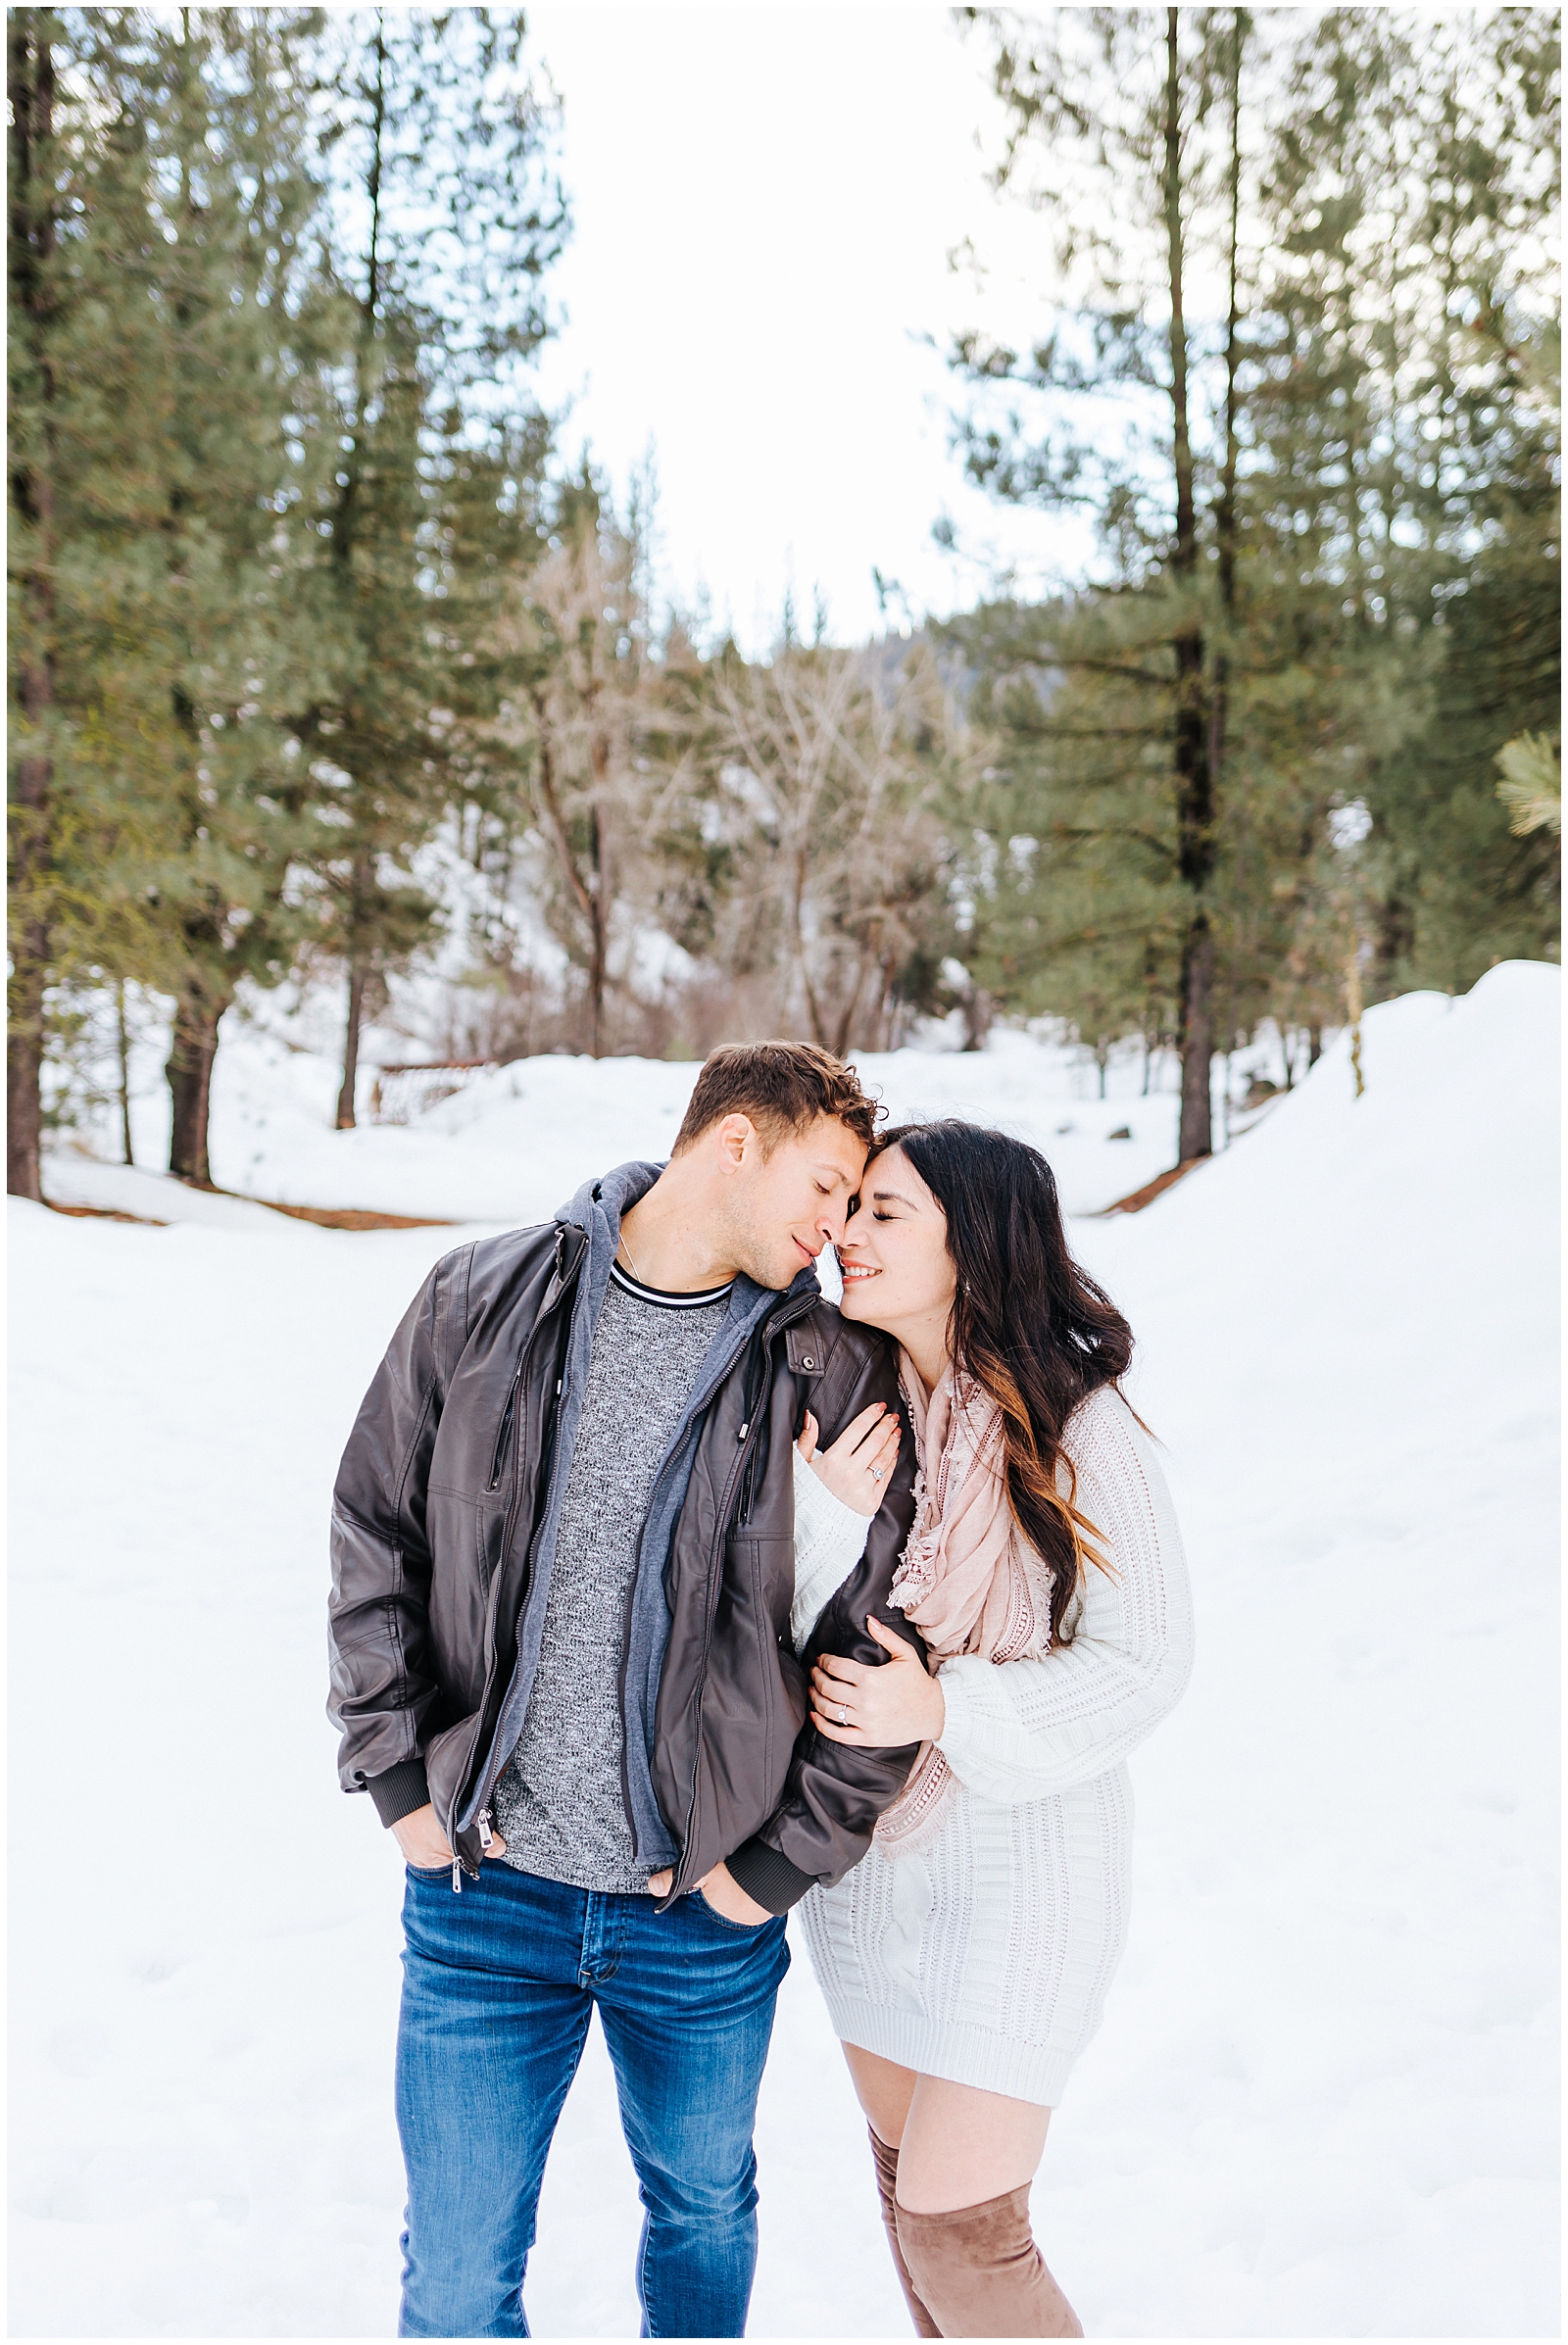 Idaho City Mountain Engagement Snuggling in Snow